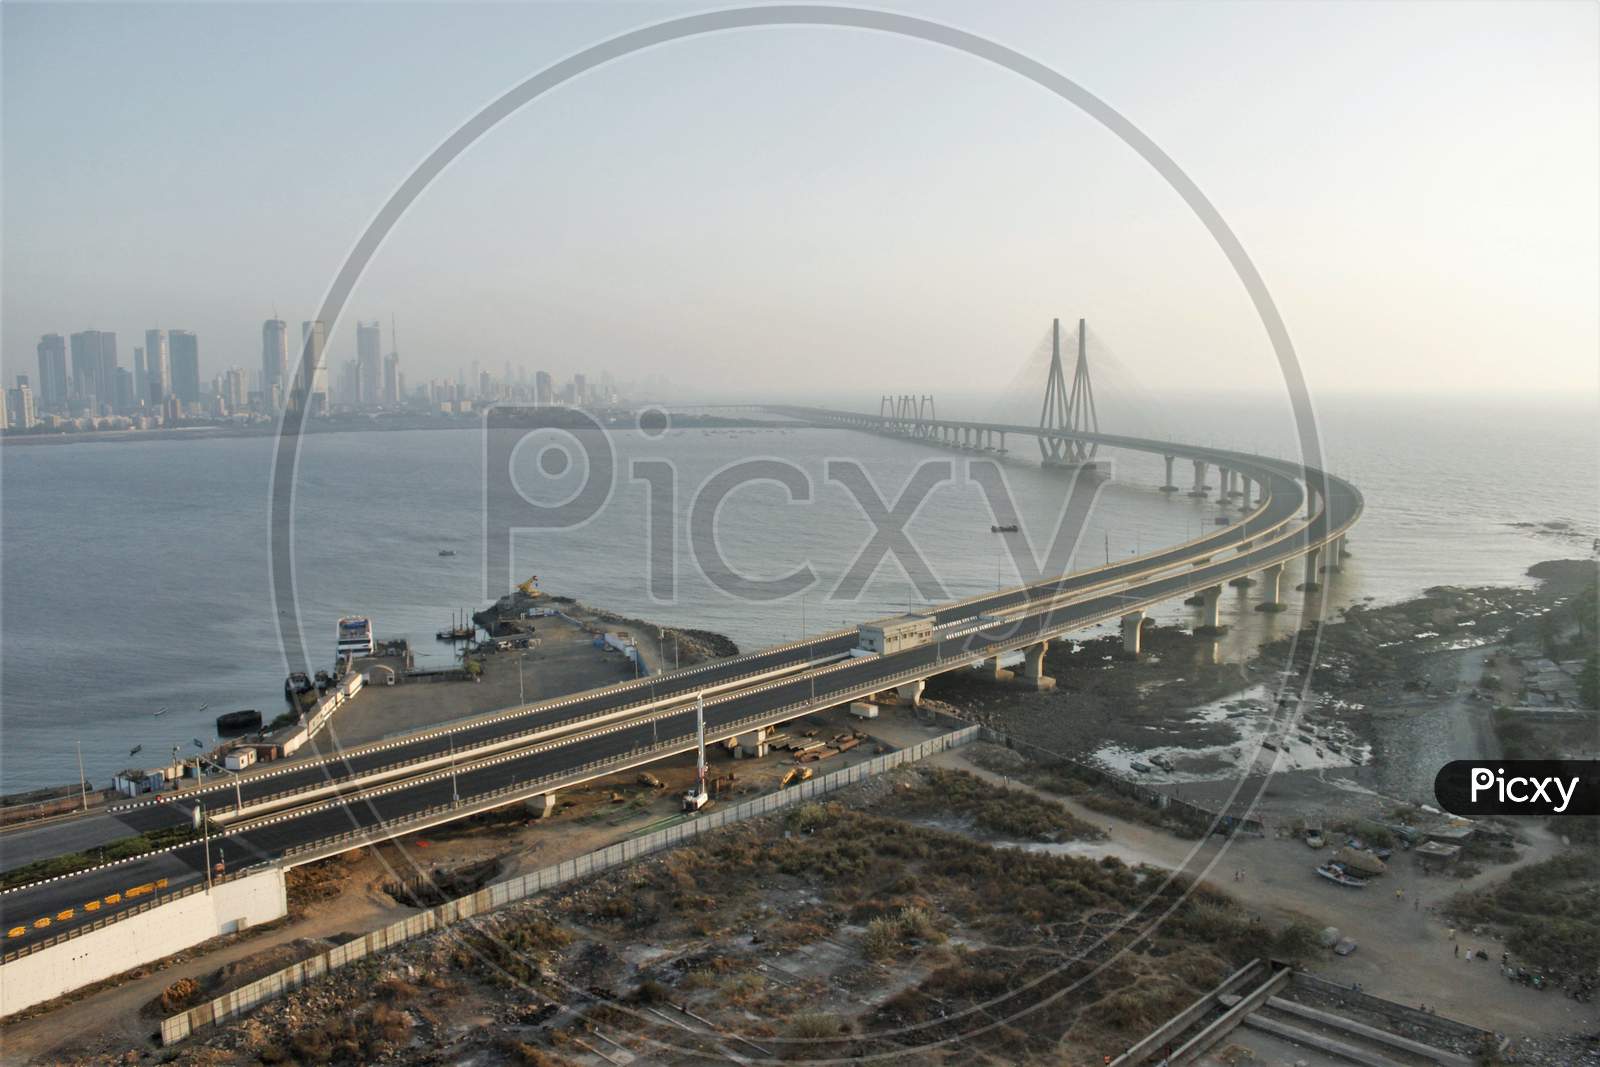 An aerial view of the deserted Bandra-Worli Sealink during a 14-hour long curfew to limit the spreading of coronavirus disease (COVID-19) in the country, in Mumbai, India on March 22, 2020.